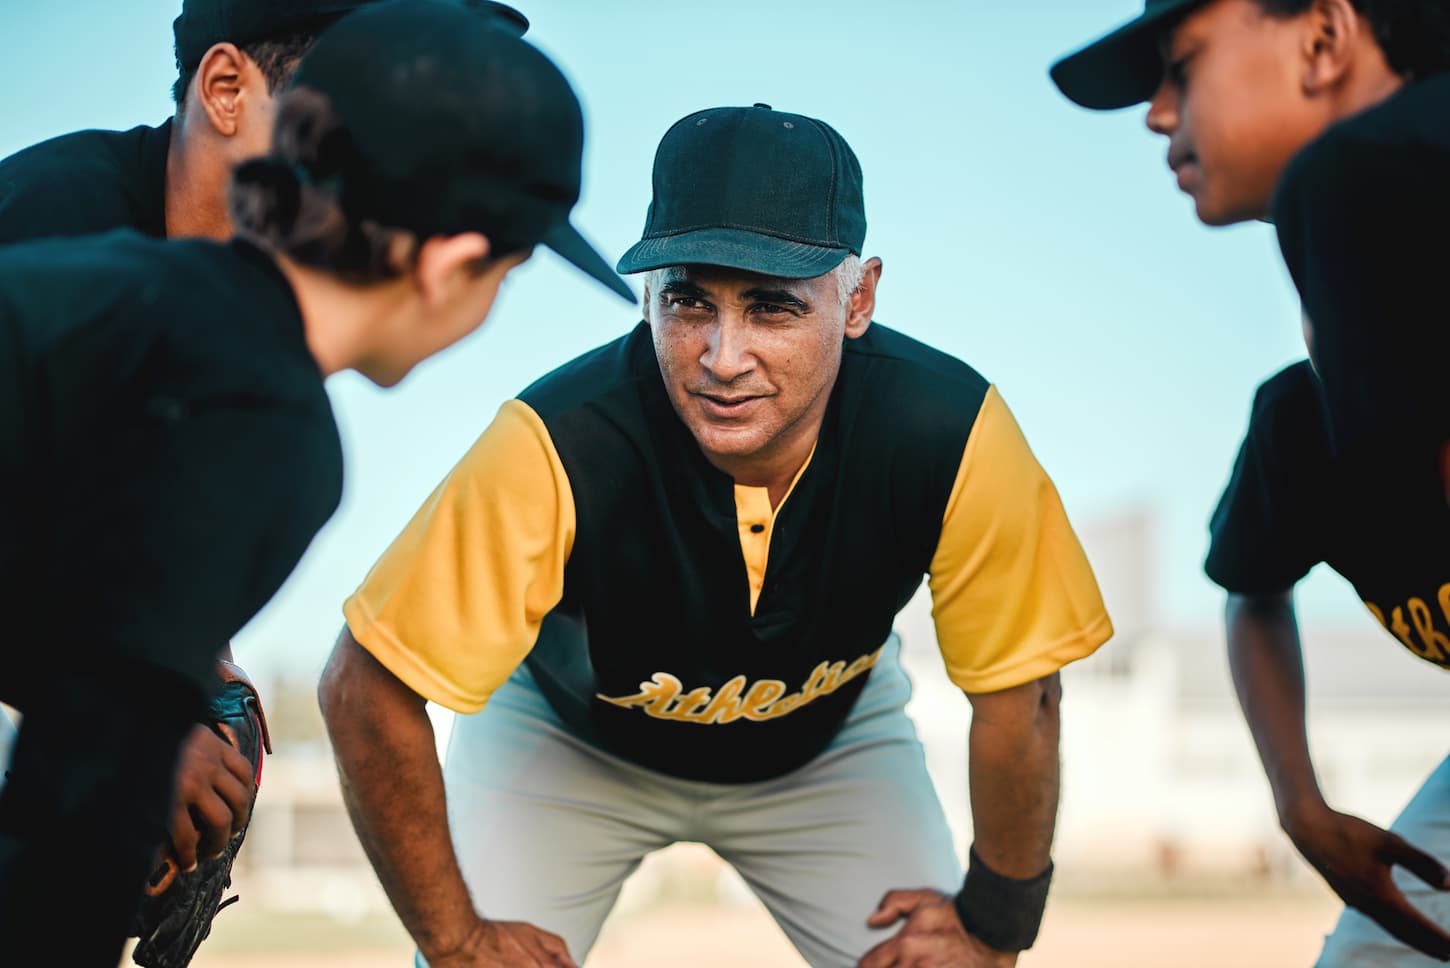 An image of a baseball coach talking to his team while out on the pitch.